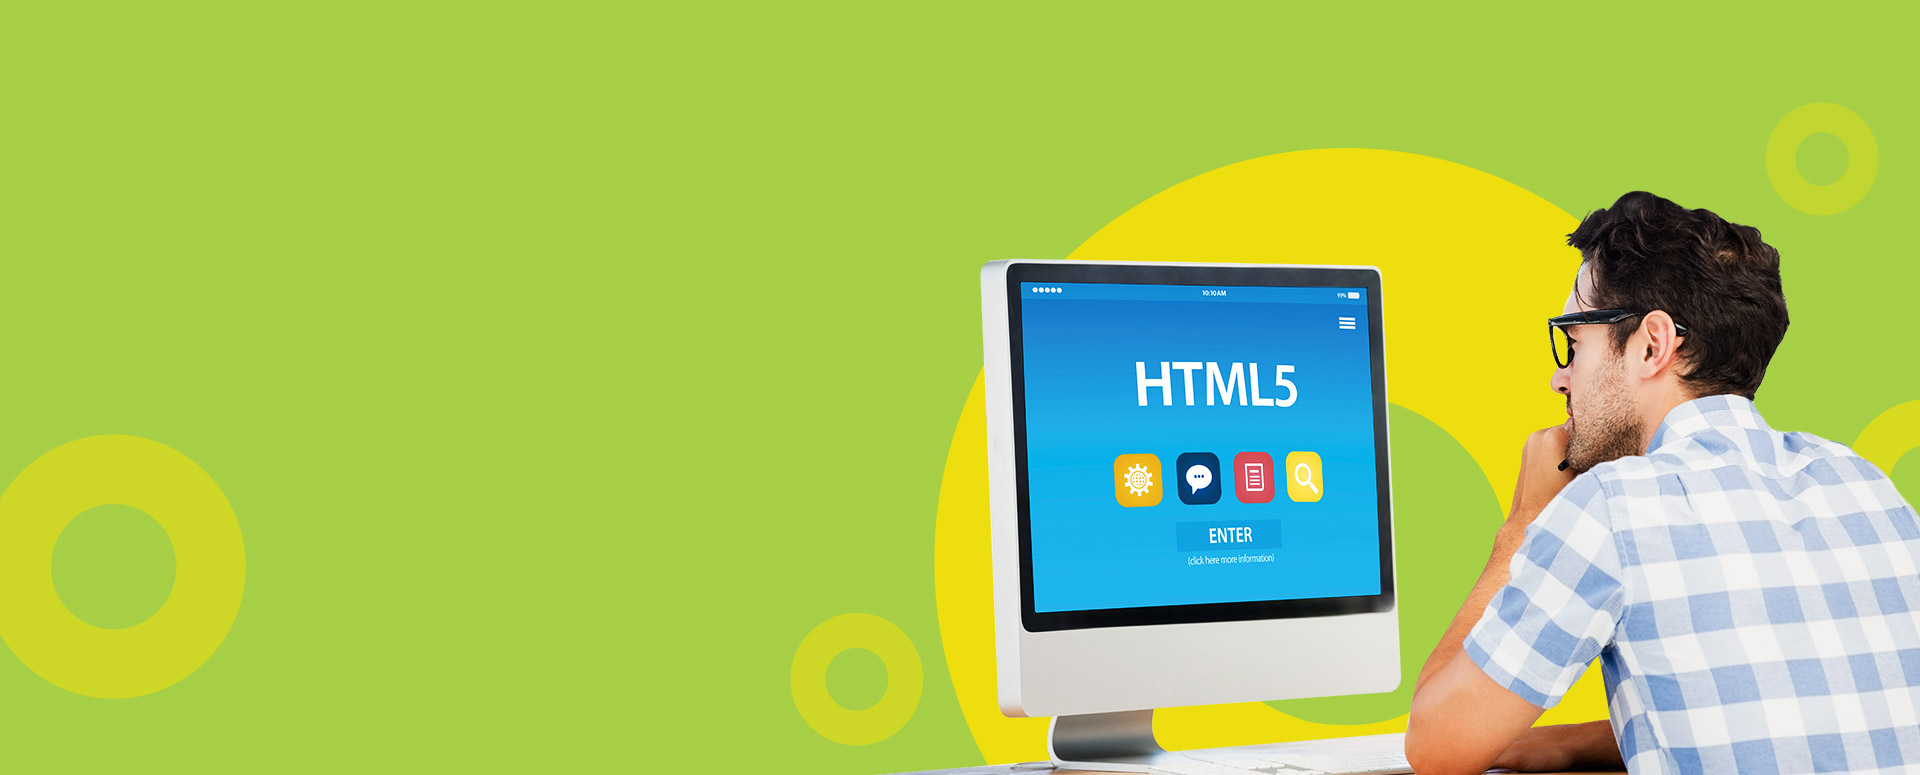 Expert Flash to HTML5 Conversion Services - Converting Legacy Courses for Future-Proof Learning. Rapid eLearning, SCORM Compliance, and Responsive Design for Seamless Mobile and Tablet Interactivity. Choose As-Is, Visual Uplifting, or Complete Redesign Options.